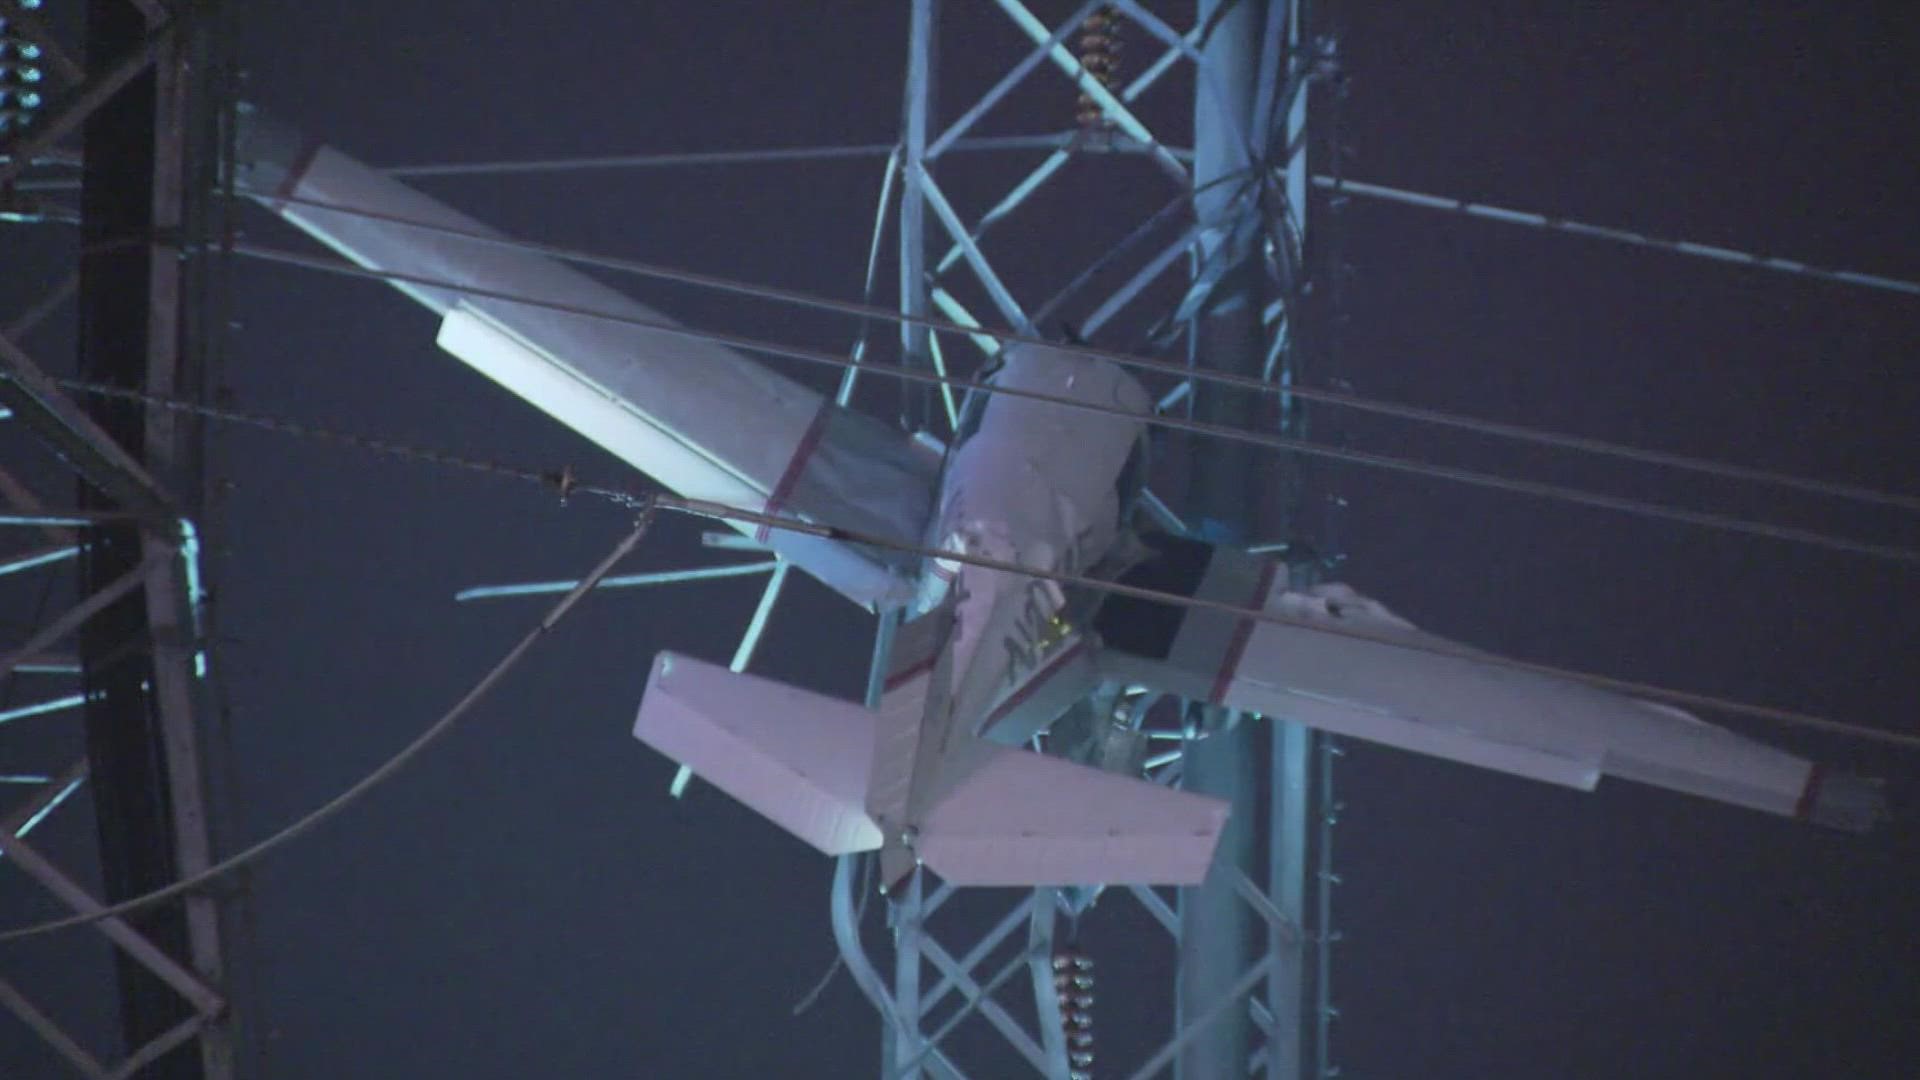 Their small single-engine plane crashed into high-tension wires about a mile from a Maryland airport Sunday evening.